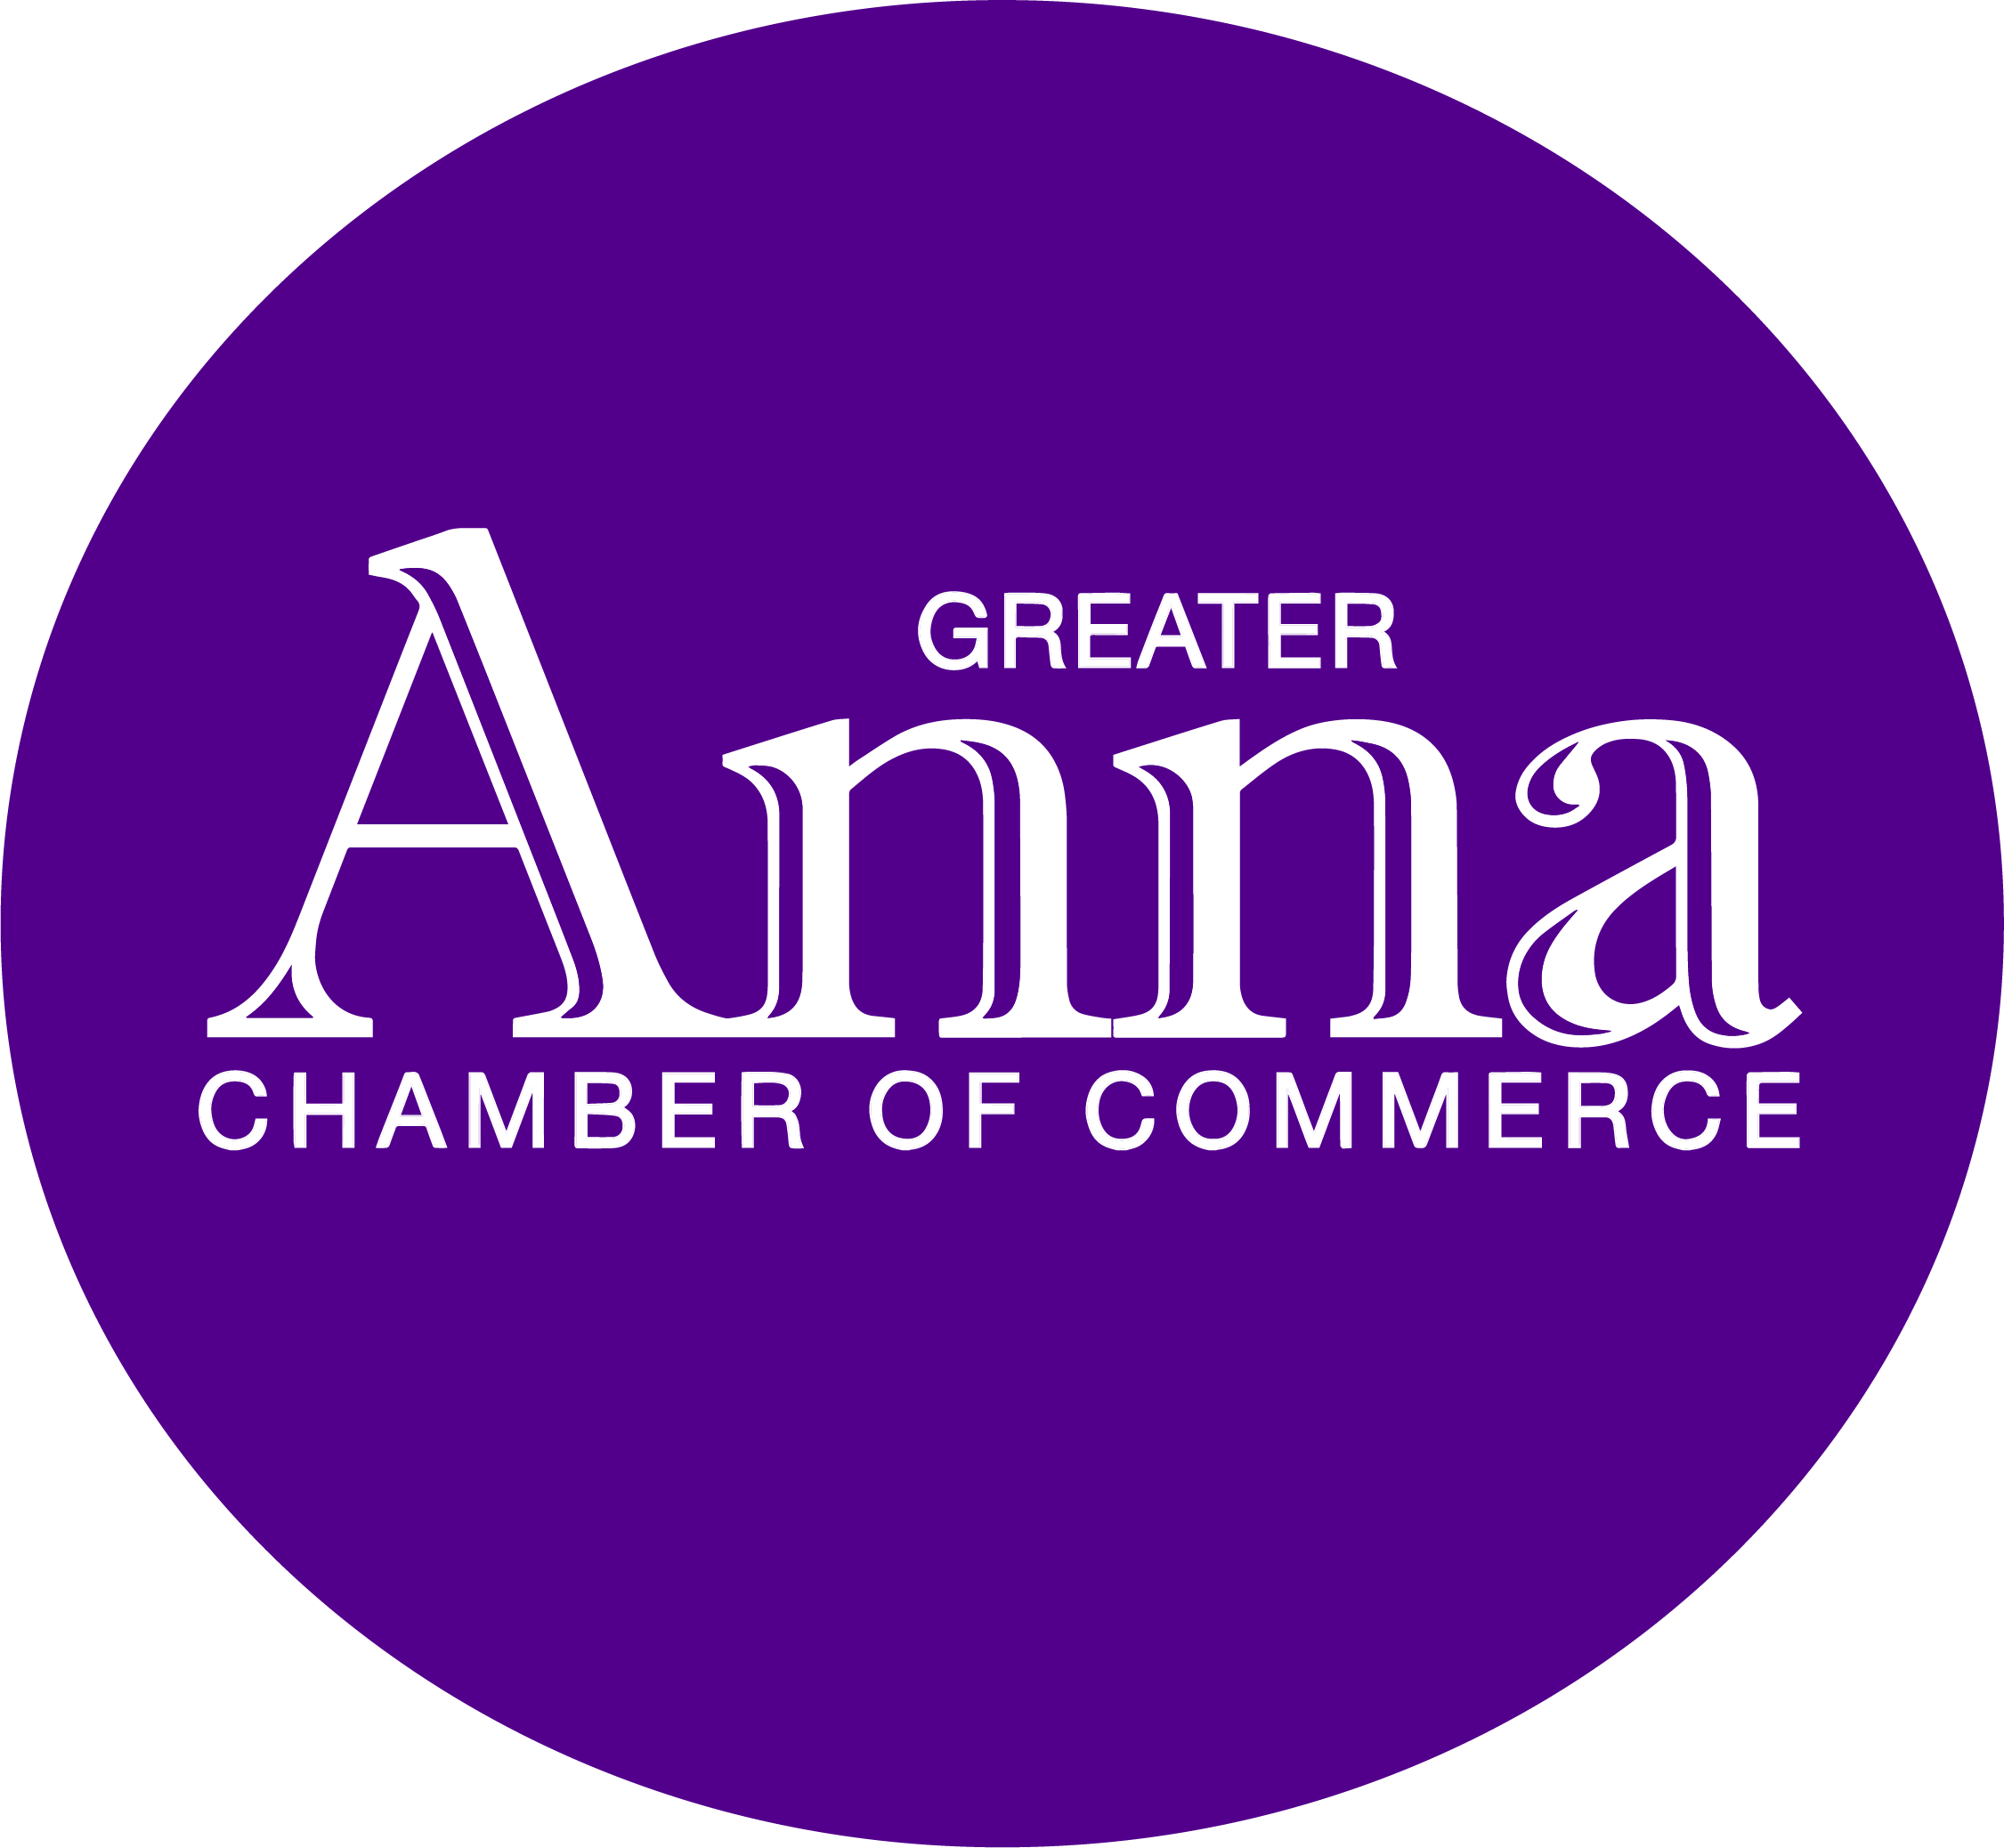 Flip Box for the moto of the Greater Anna Chamber of Commerce for the use of linking to the website